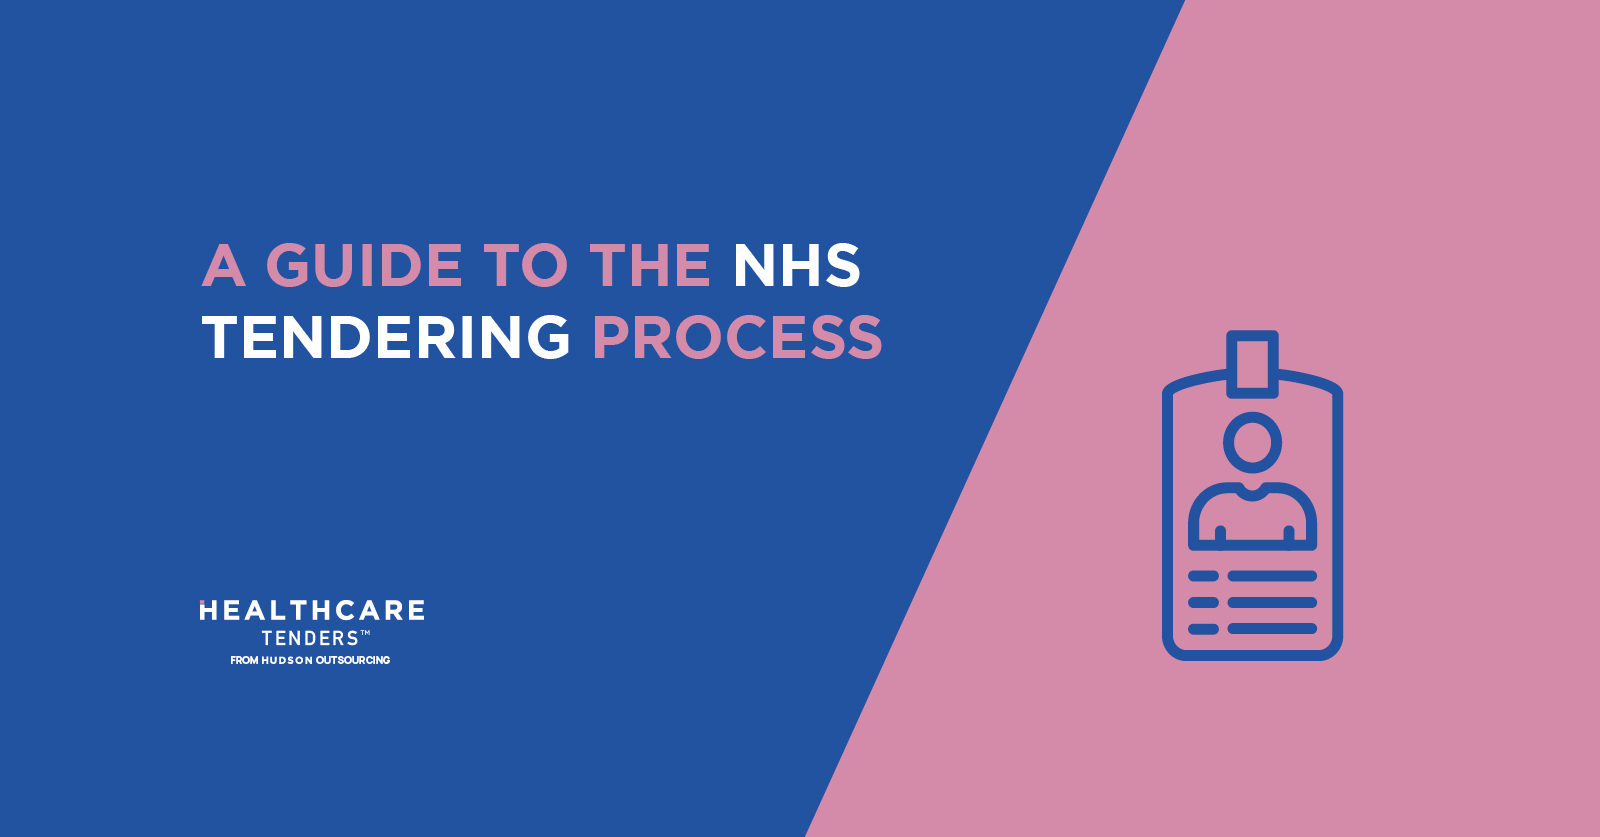 The NHS Tendering Process Explained